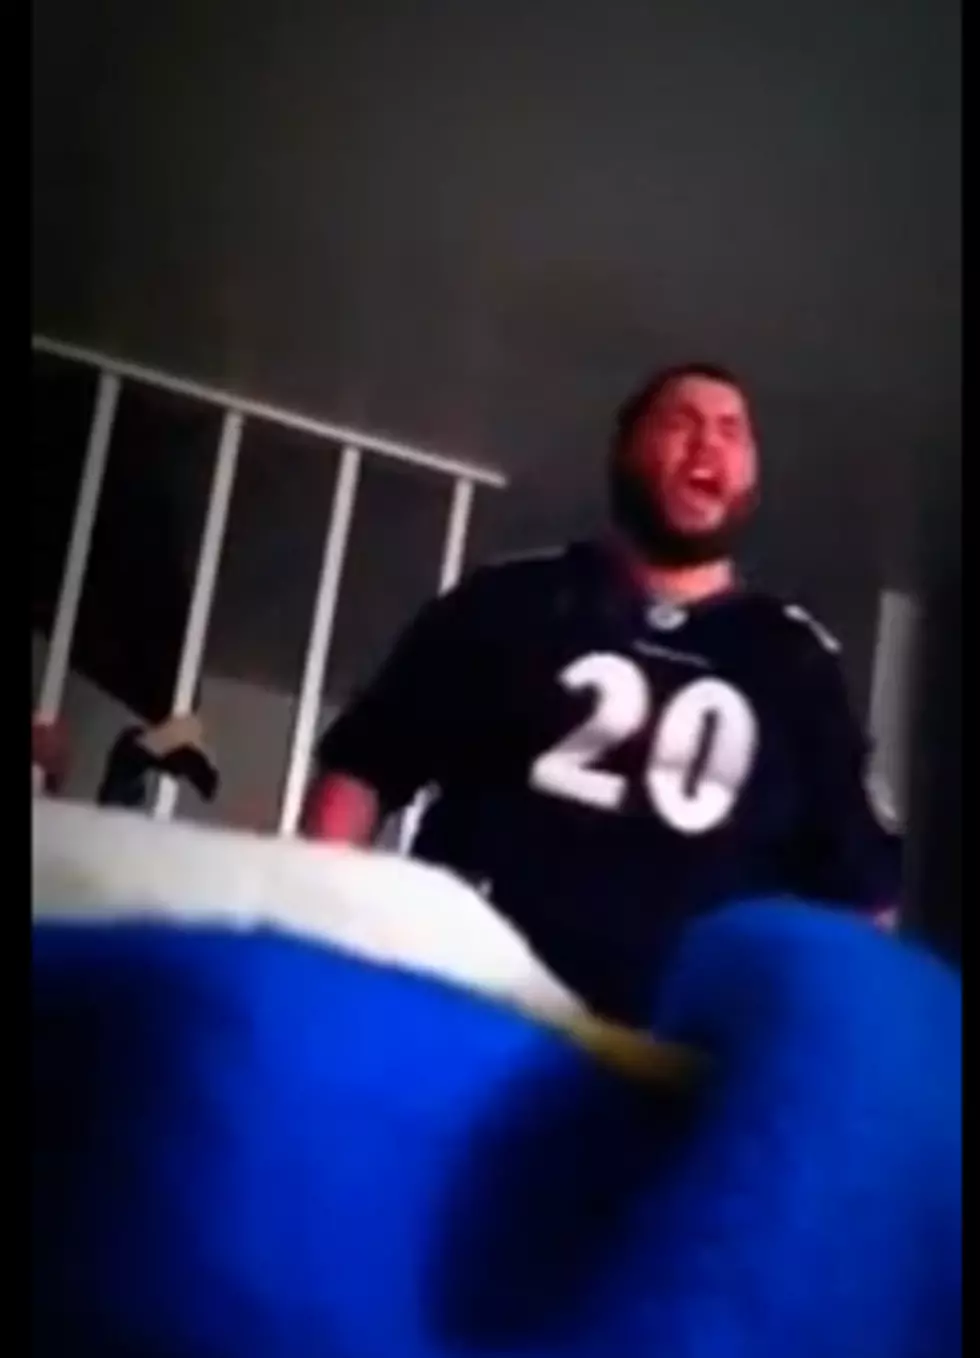 Baltimore Raven Fan Loses His Mind After Missed Field Goal [Video]